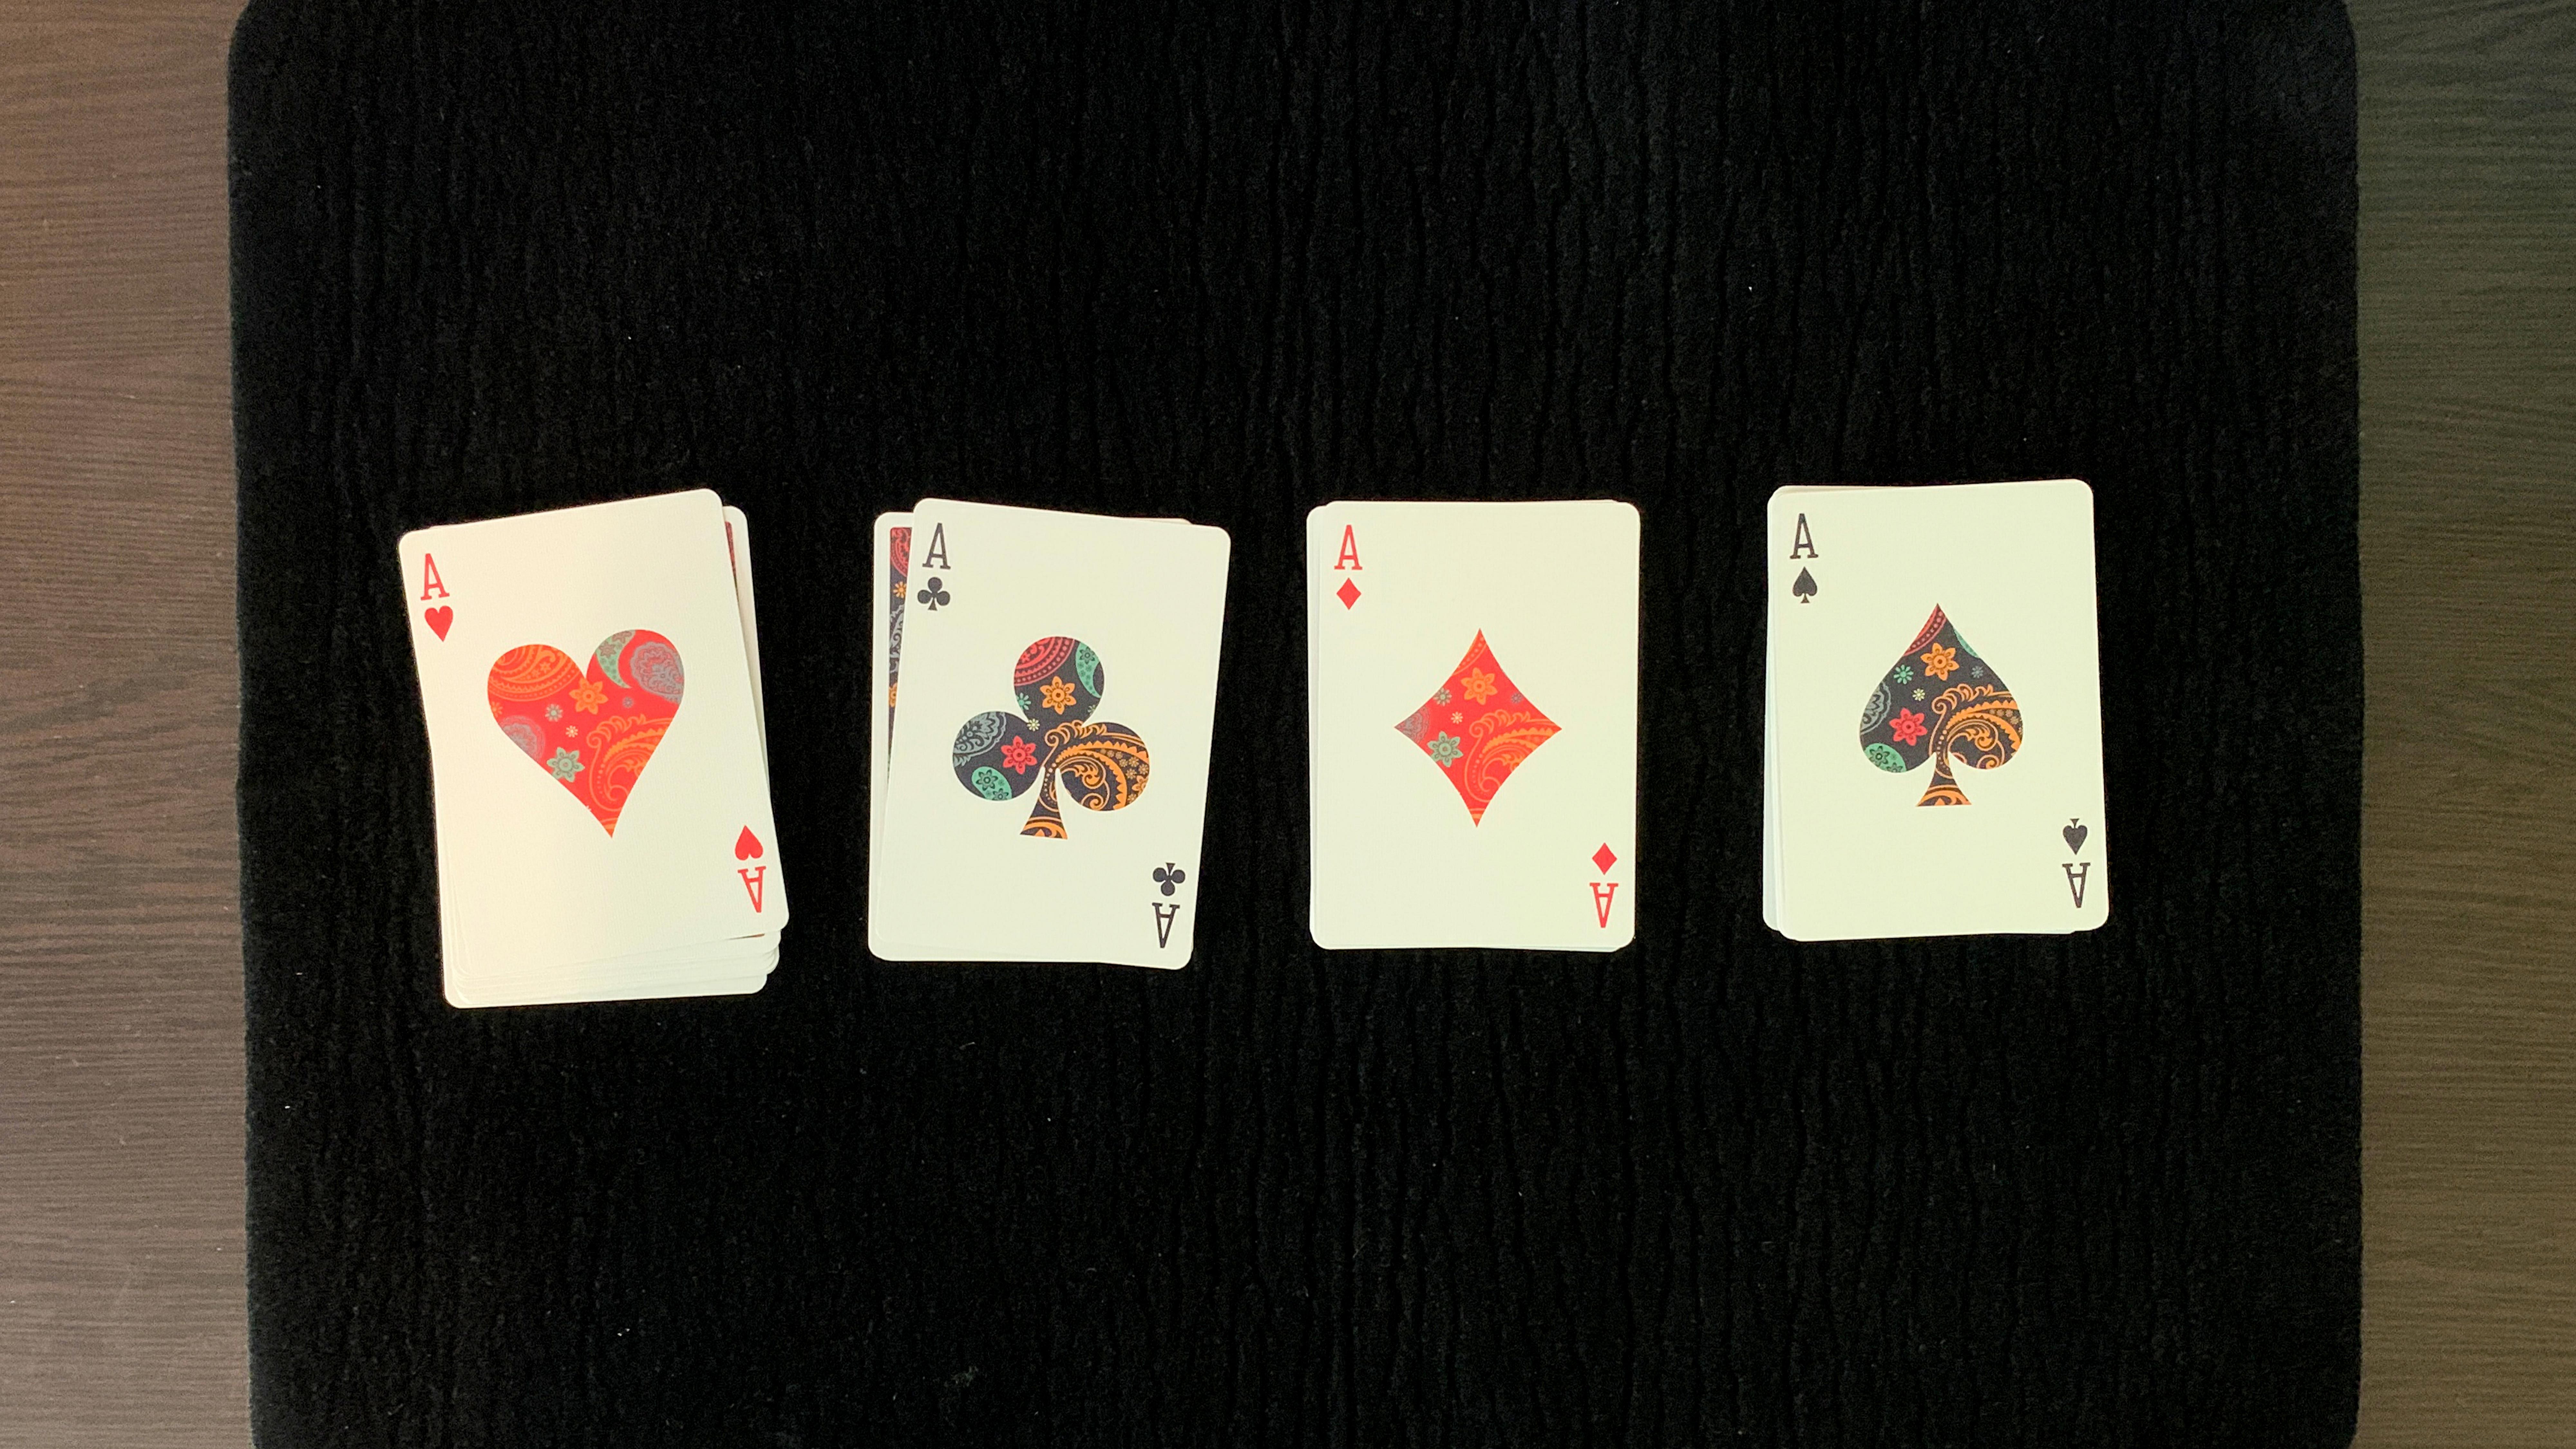 The four aces appear on the tops of four piles of playing cards during a poker magic trick